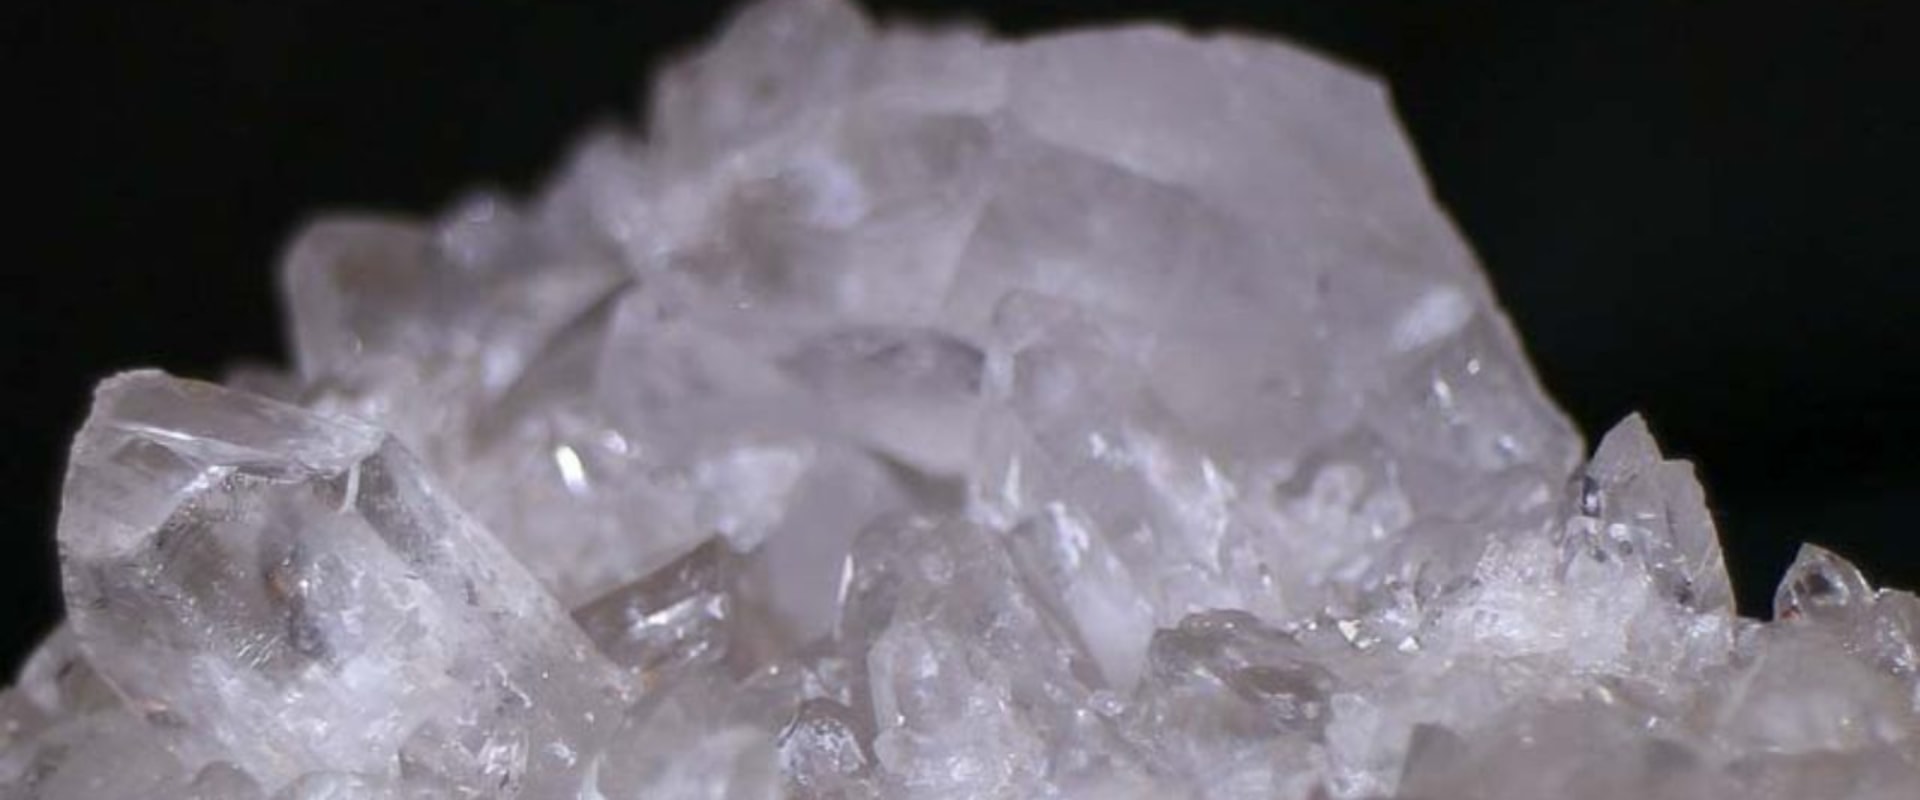 At what temperature do crystals form?